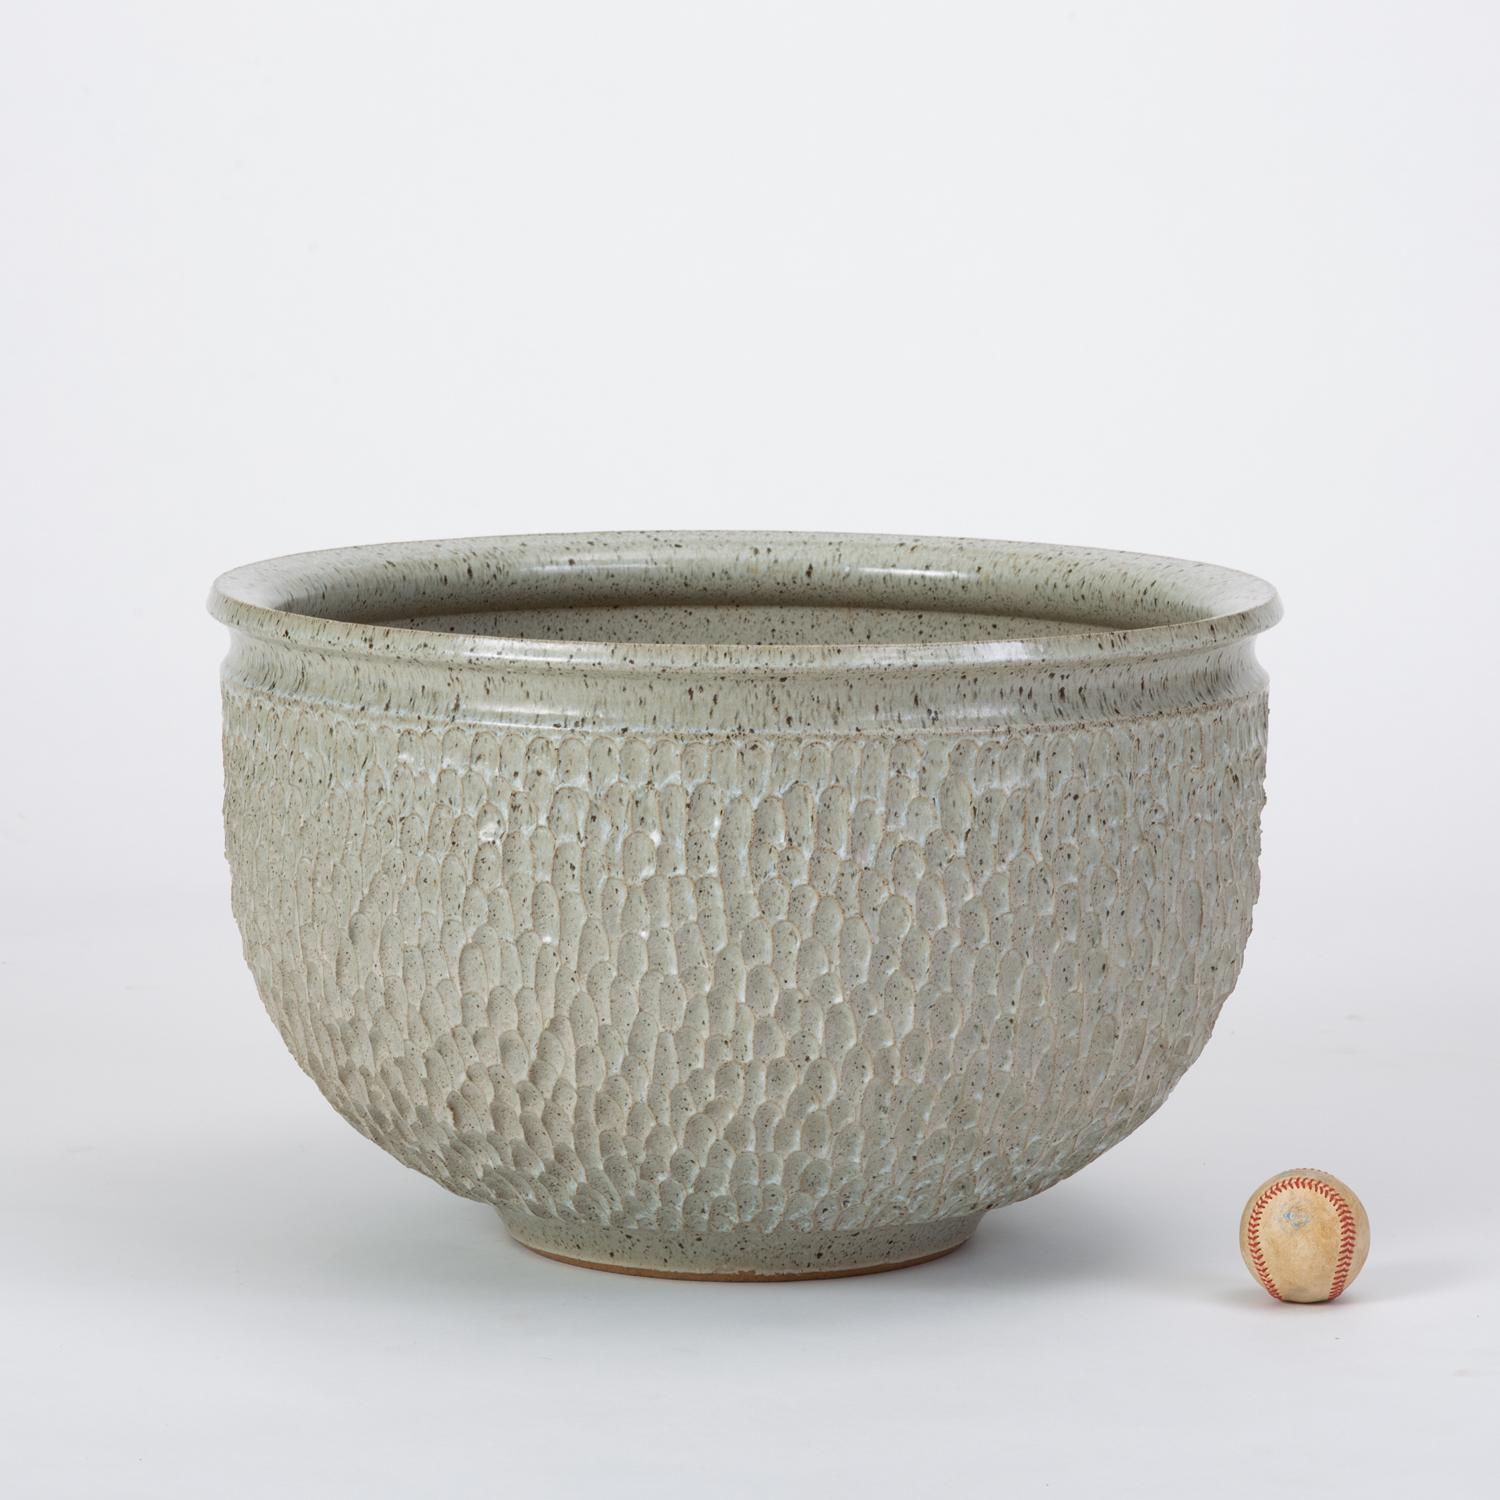 A wide stoneware planter from Robert Maxwell and David Cressey’s 1970s collaboration, Earthgender. One of the less common designs from this partnership, the ‘Pebble’ pattern has a textured surface of repeating impressed concavities. This example has